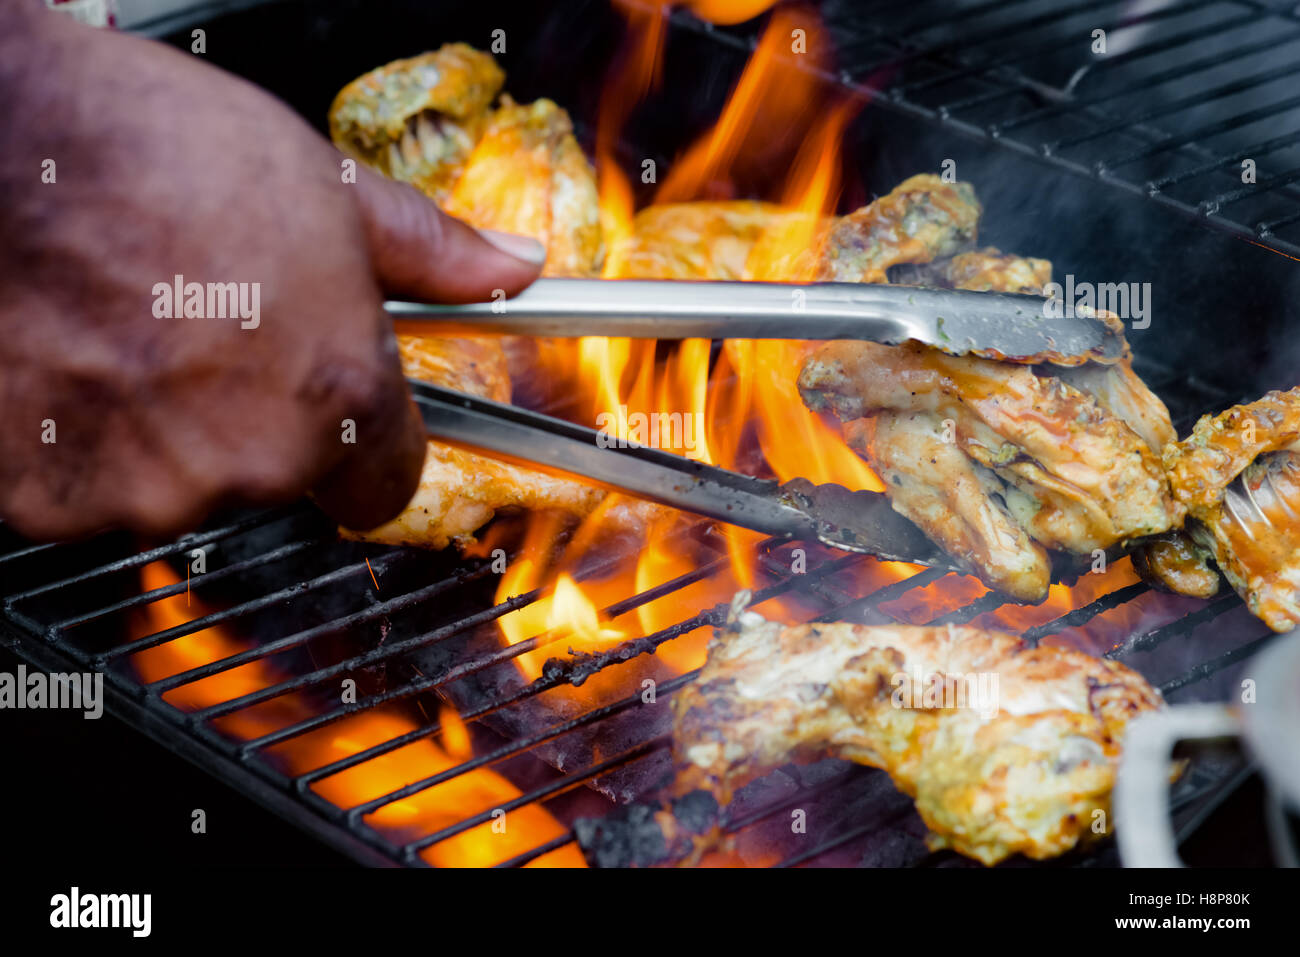 Chef cooking jerk barbecue BBQ chicken on the grill hand turning food Stock  Photo - Alamy